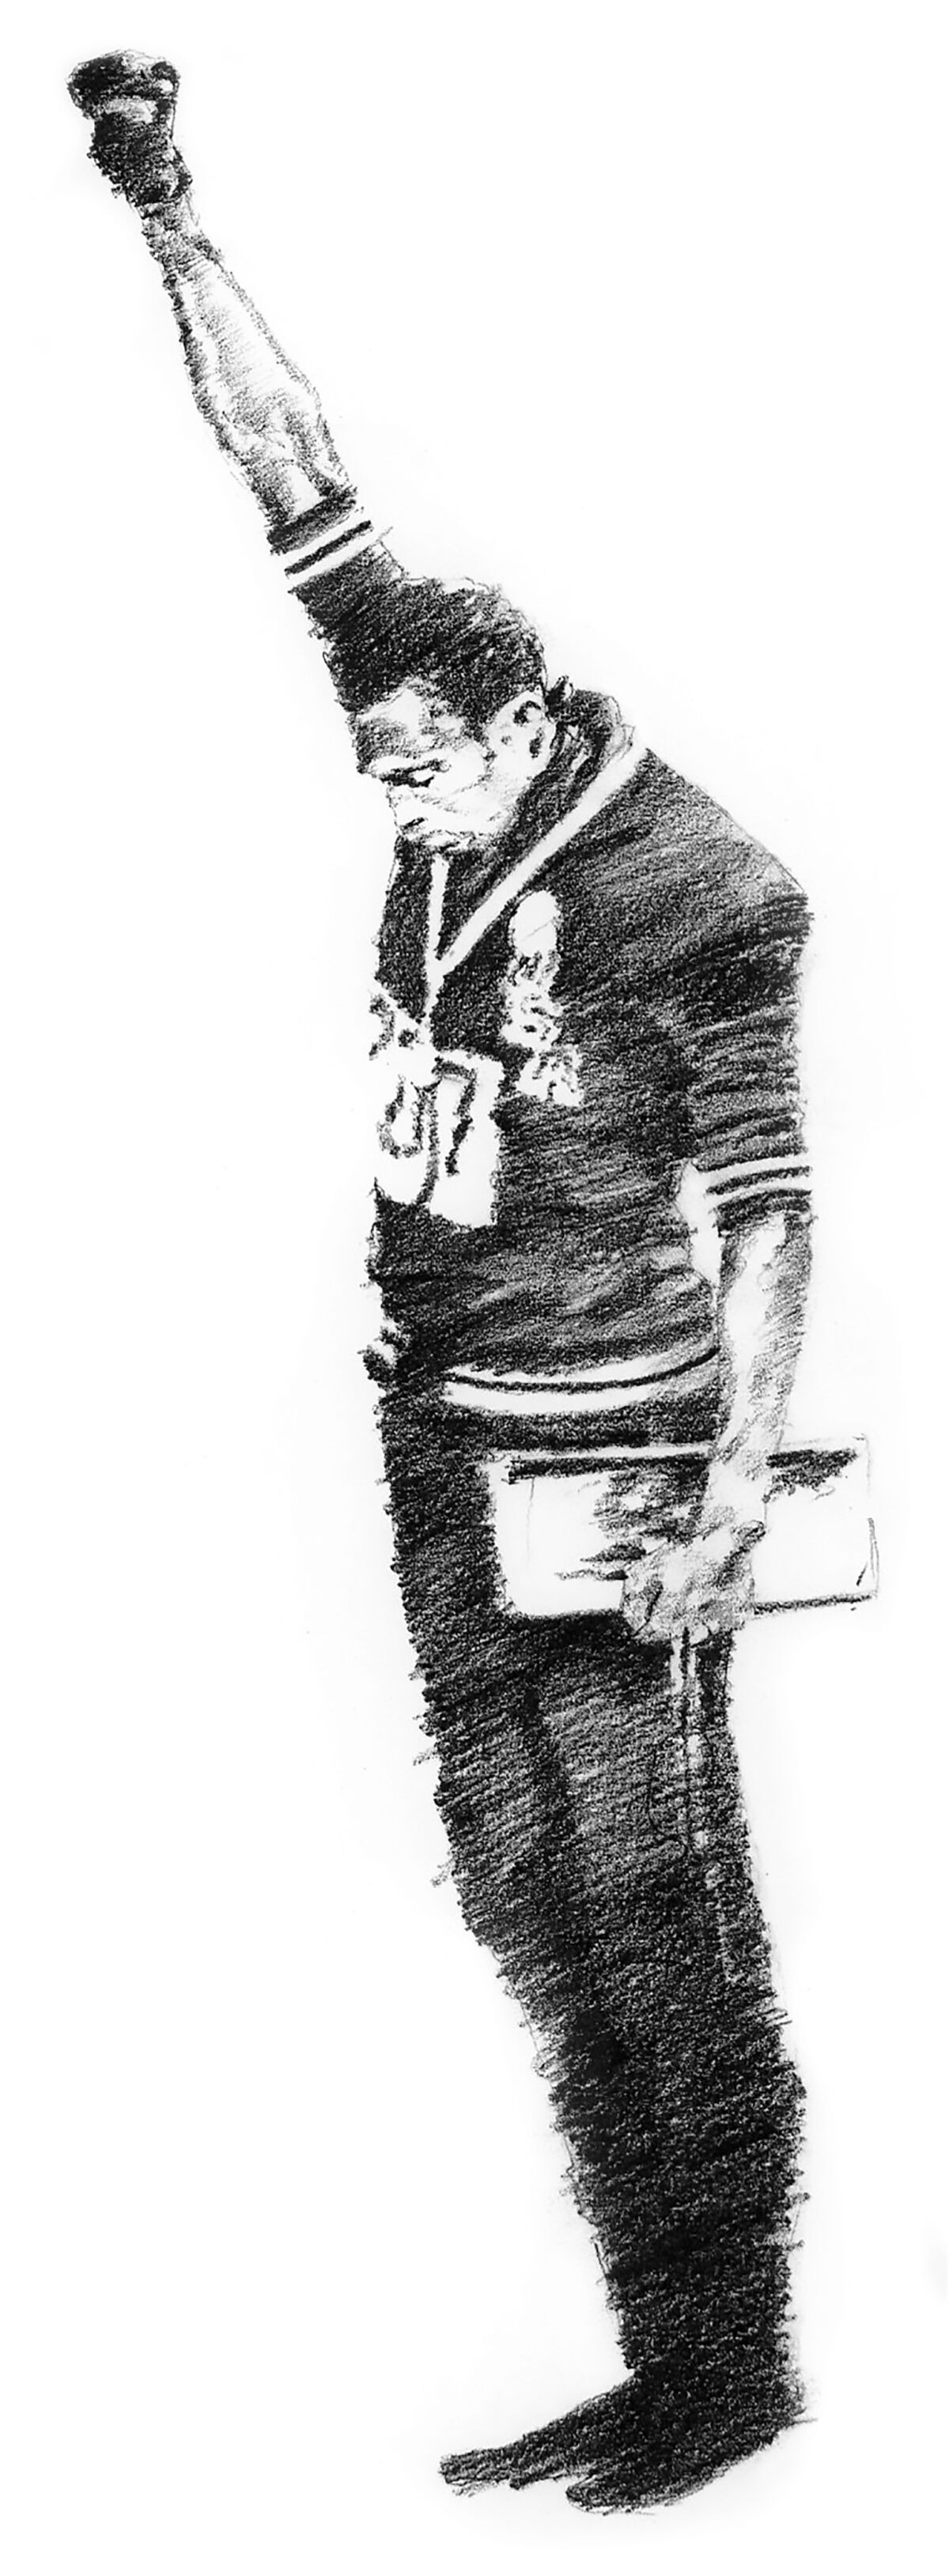 Study for Glenn Kaino's drawing "Salute," graphite on paper, 2014, depicting Tommie Smith's 1968 protest